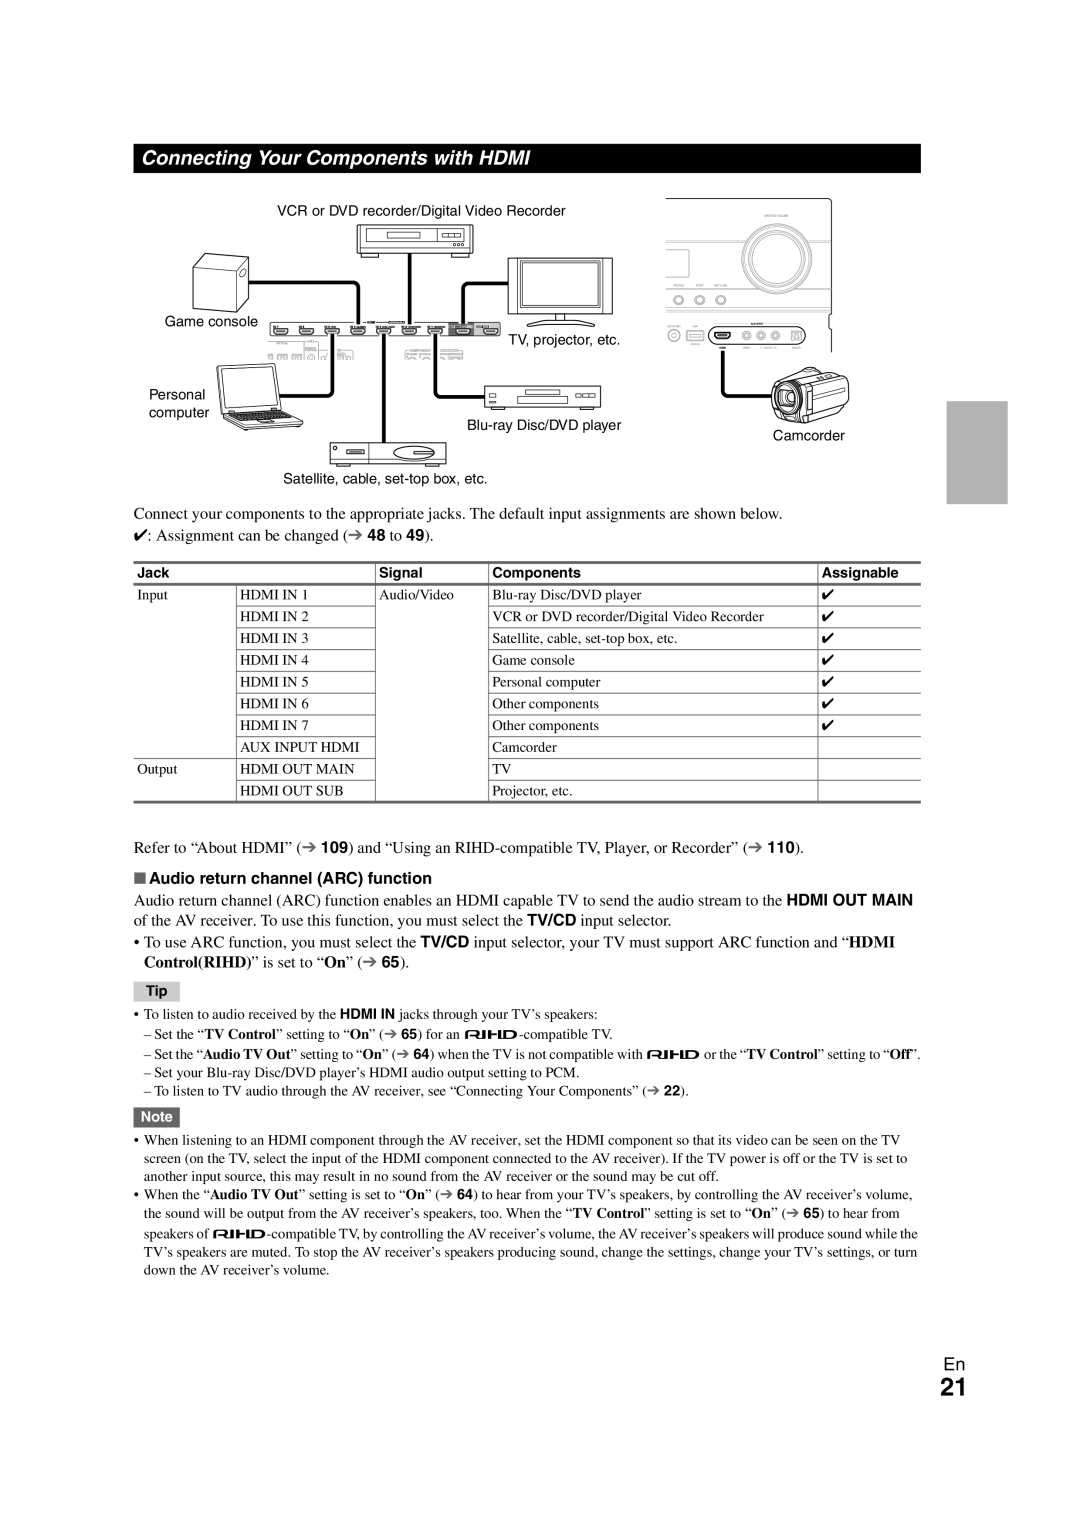 Onkyo TX-NR3008 instruction manual Connecting Your Components with HDMI, Audio return channel ARC function 